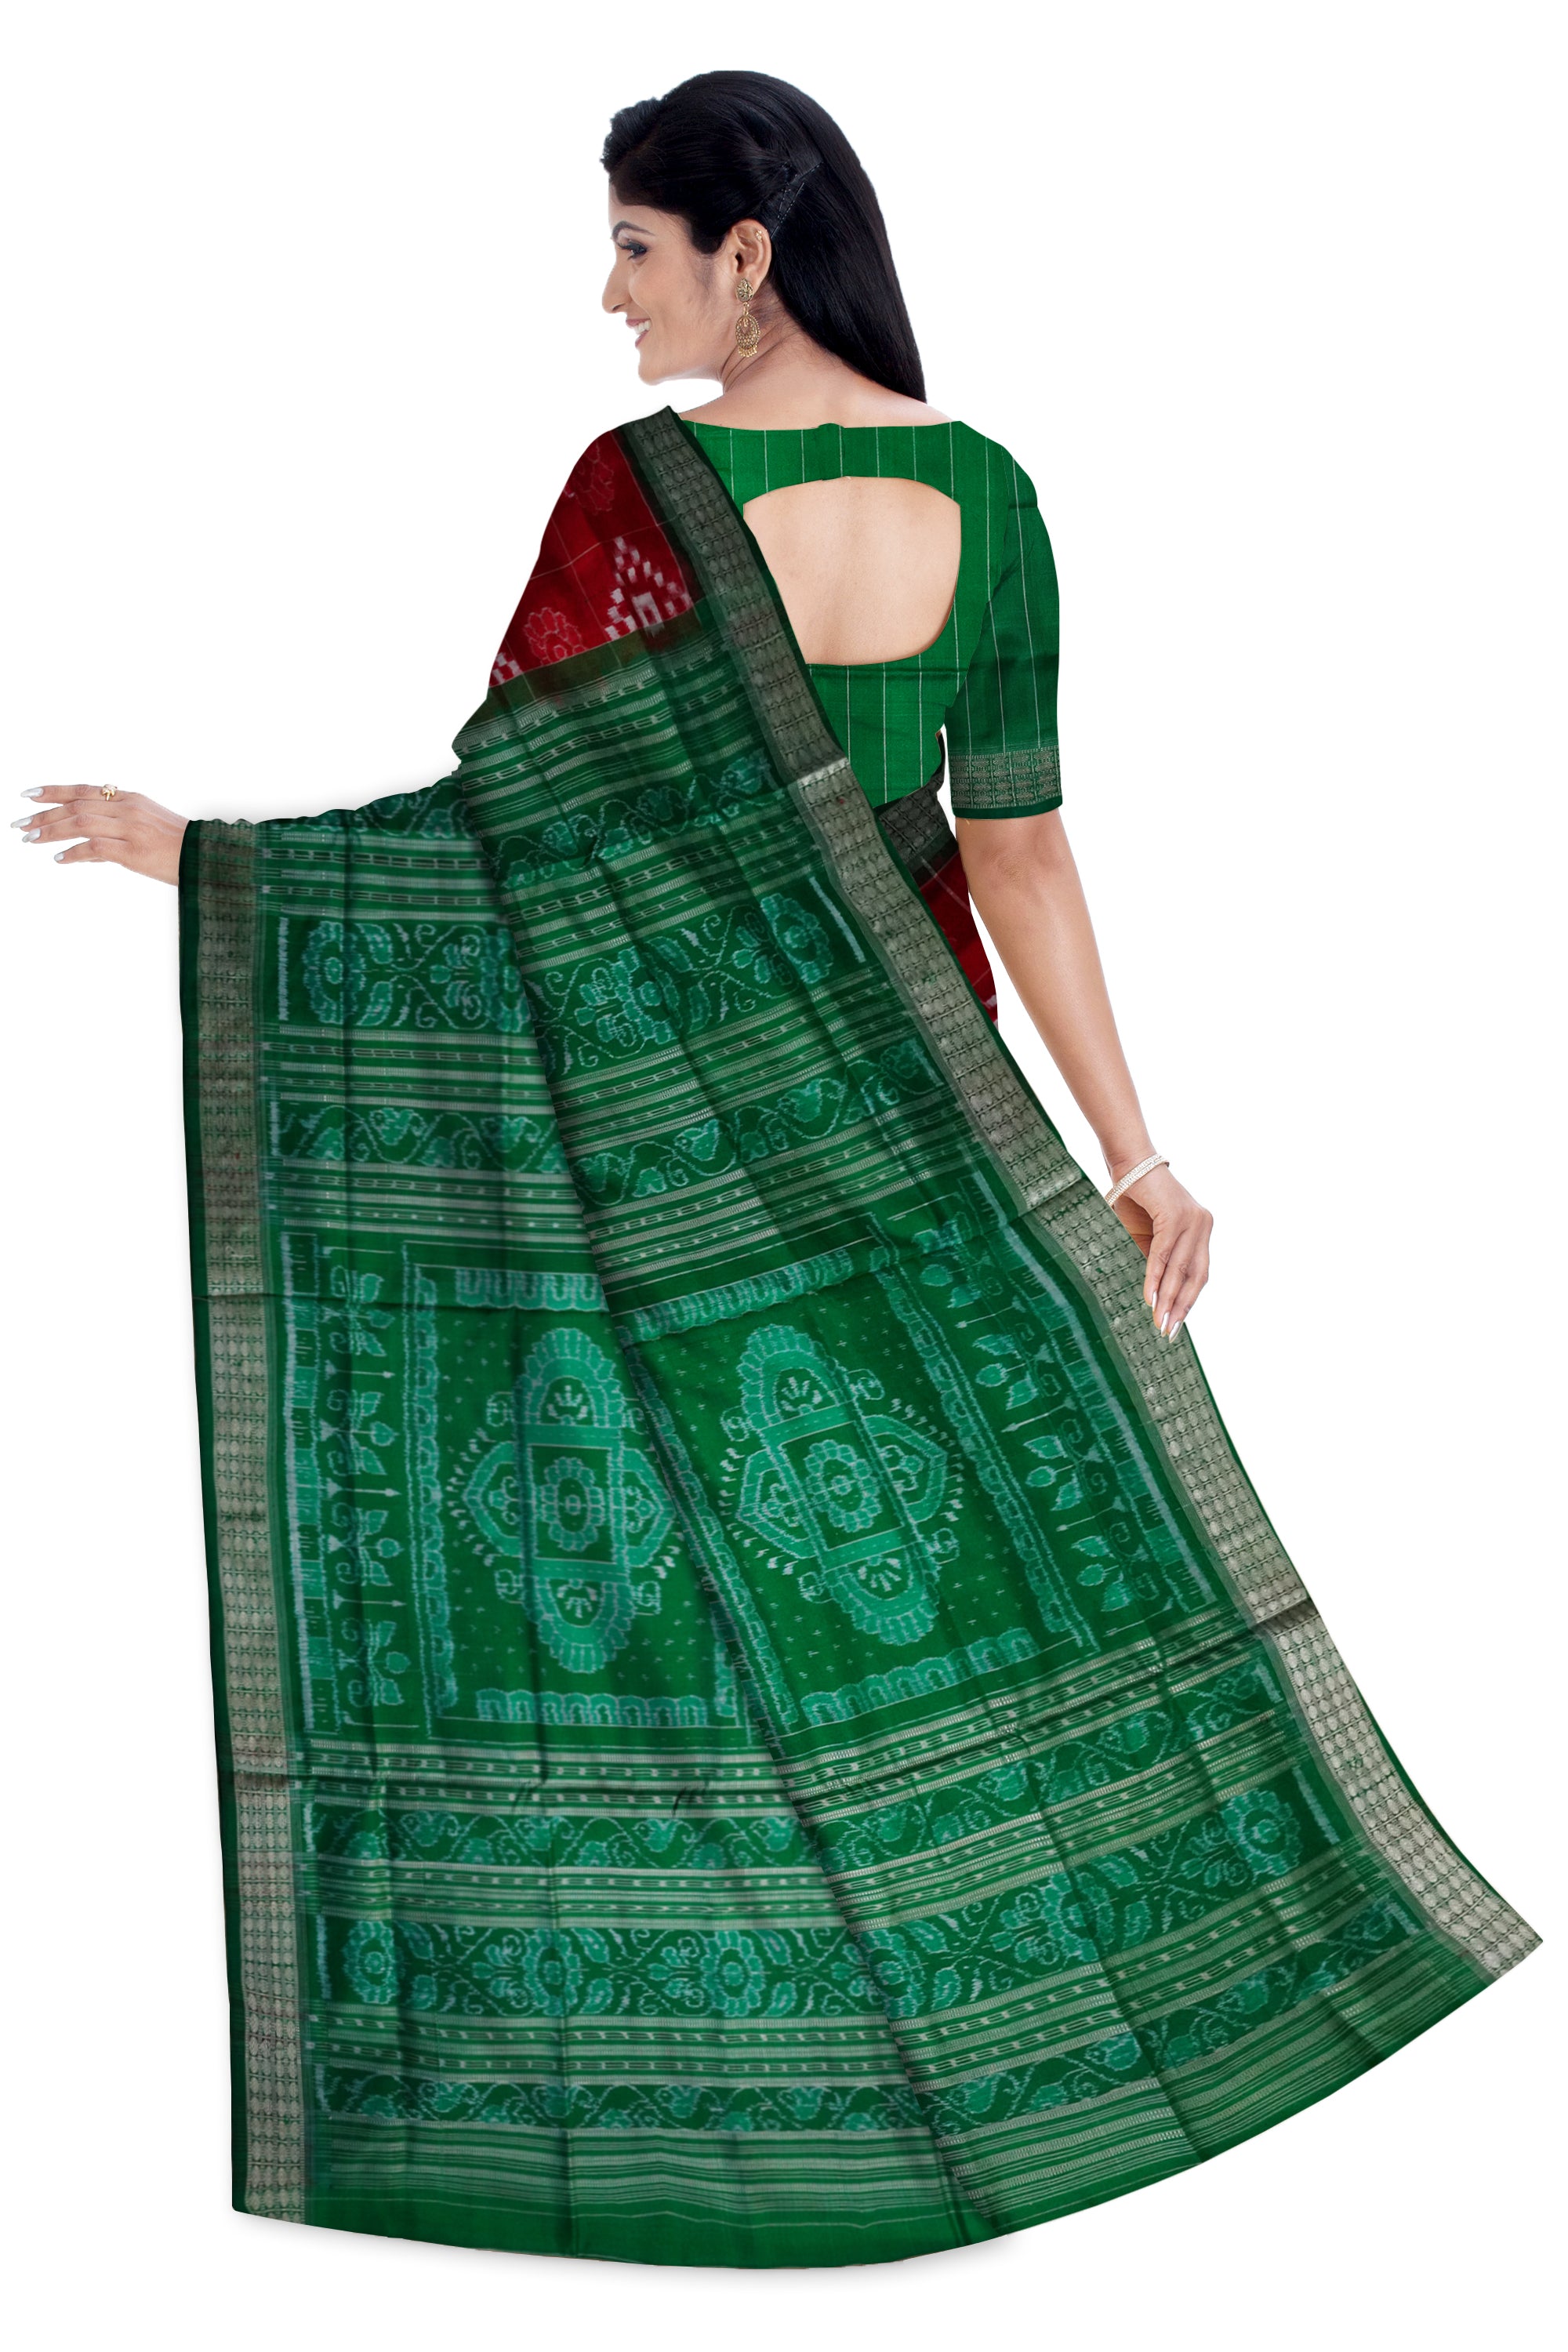 Flowers and Pasapali design in boxes pattern Pure silk pata saree in Maroon and Green color. - Koshali Arts & Crafts Enterprise